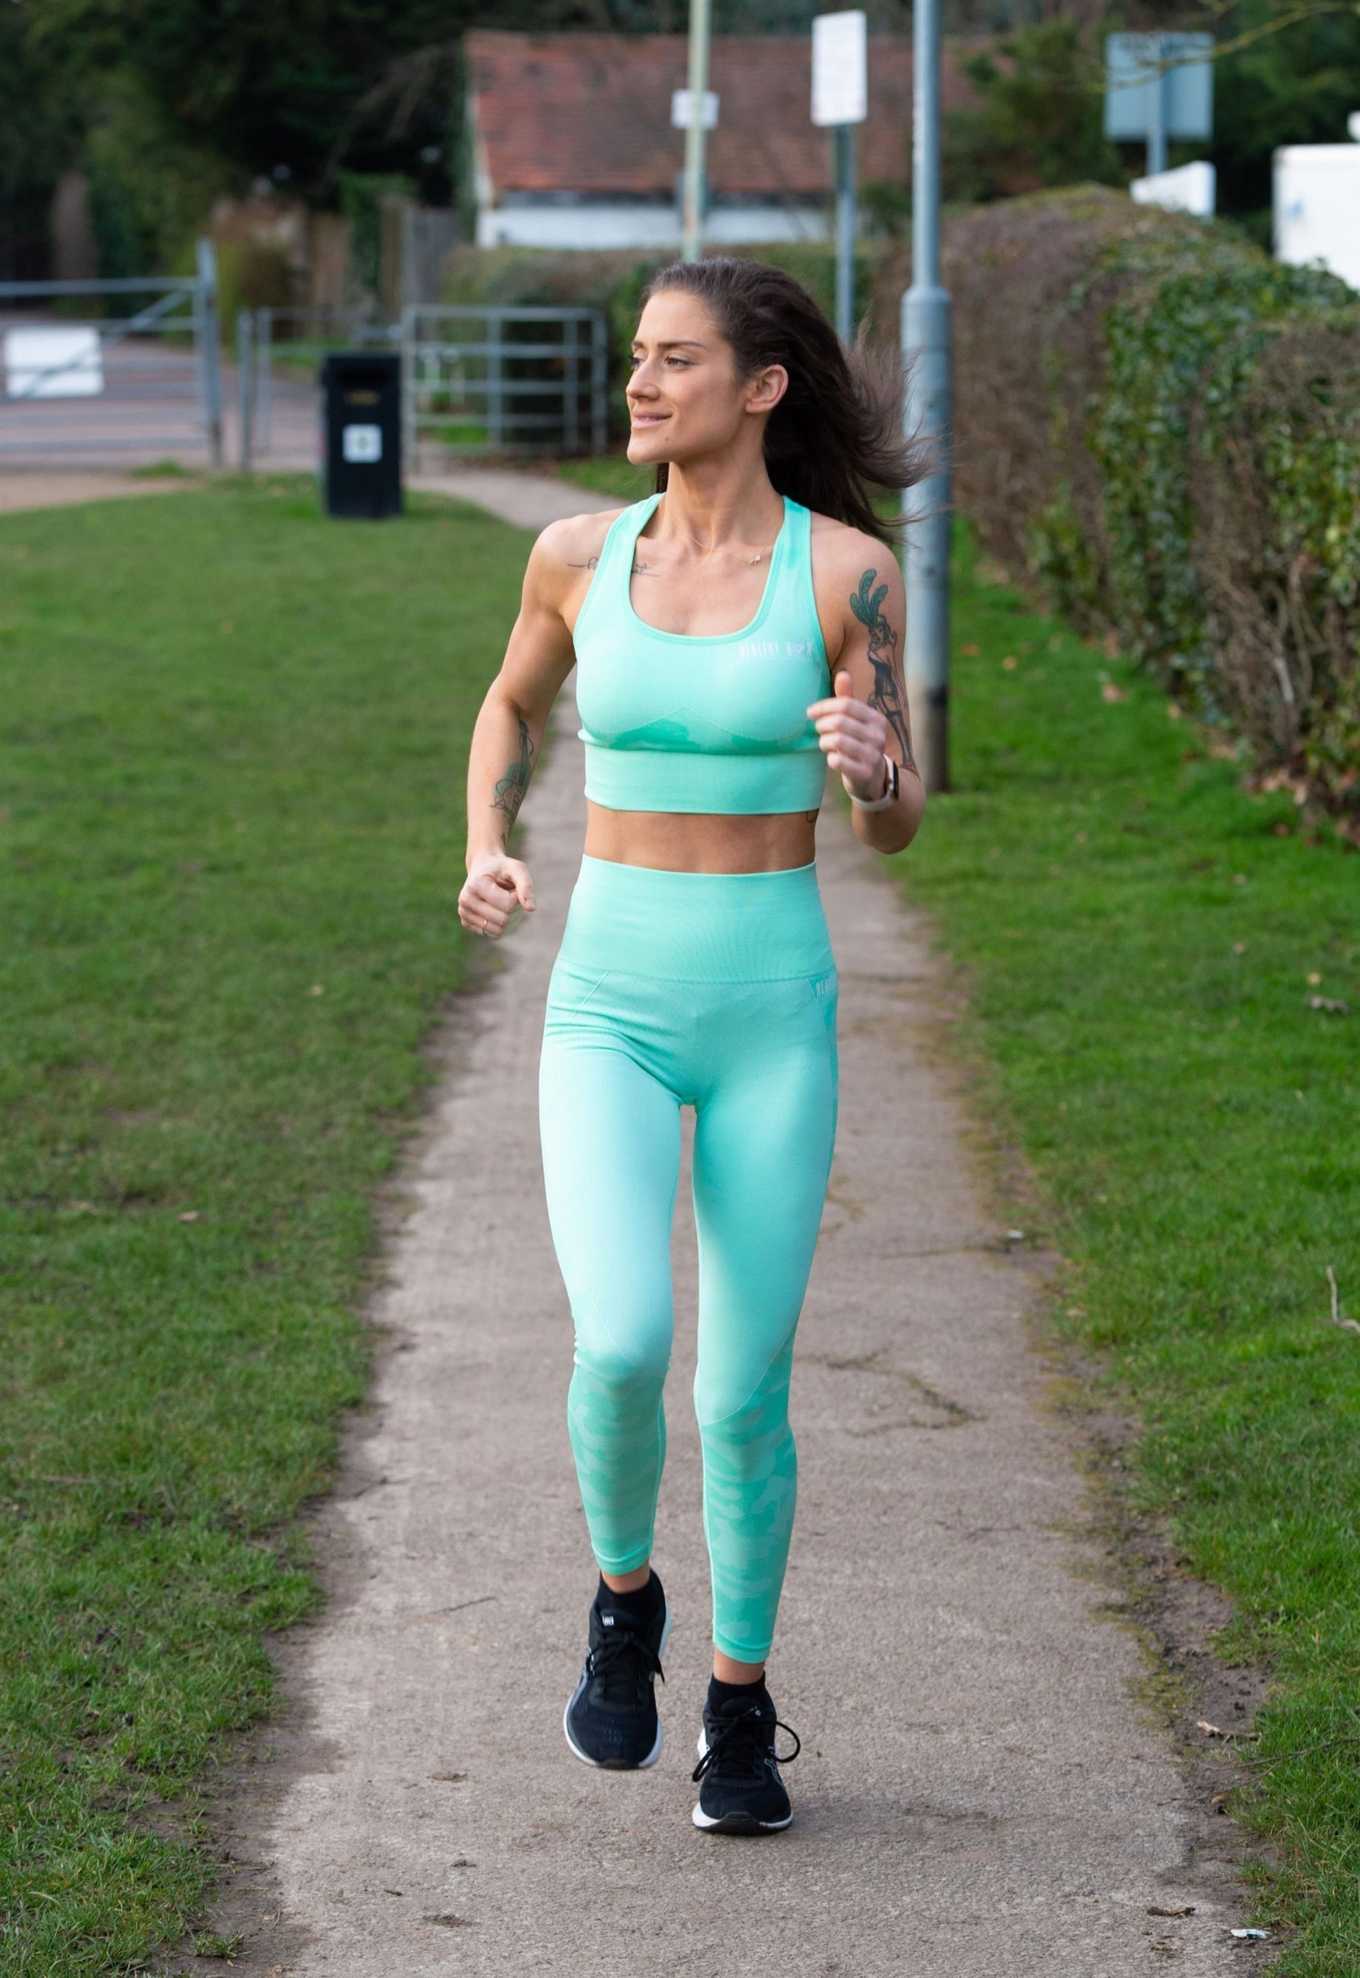 Katie Waissel â€“ Working out at her local park in North London